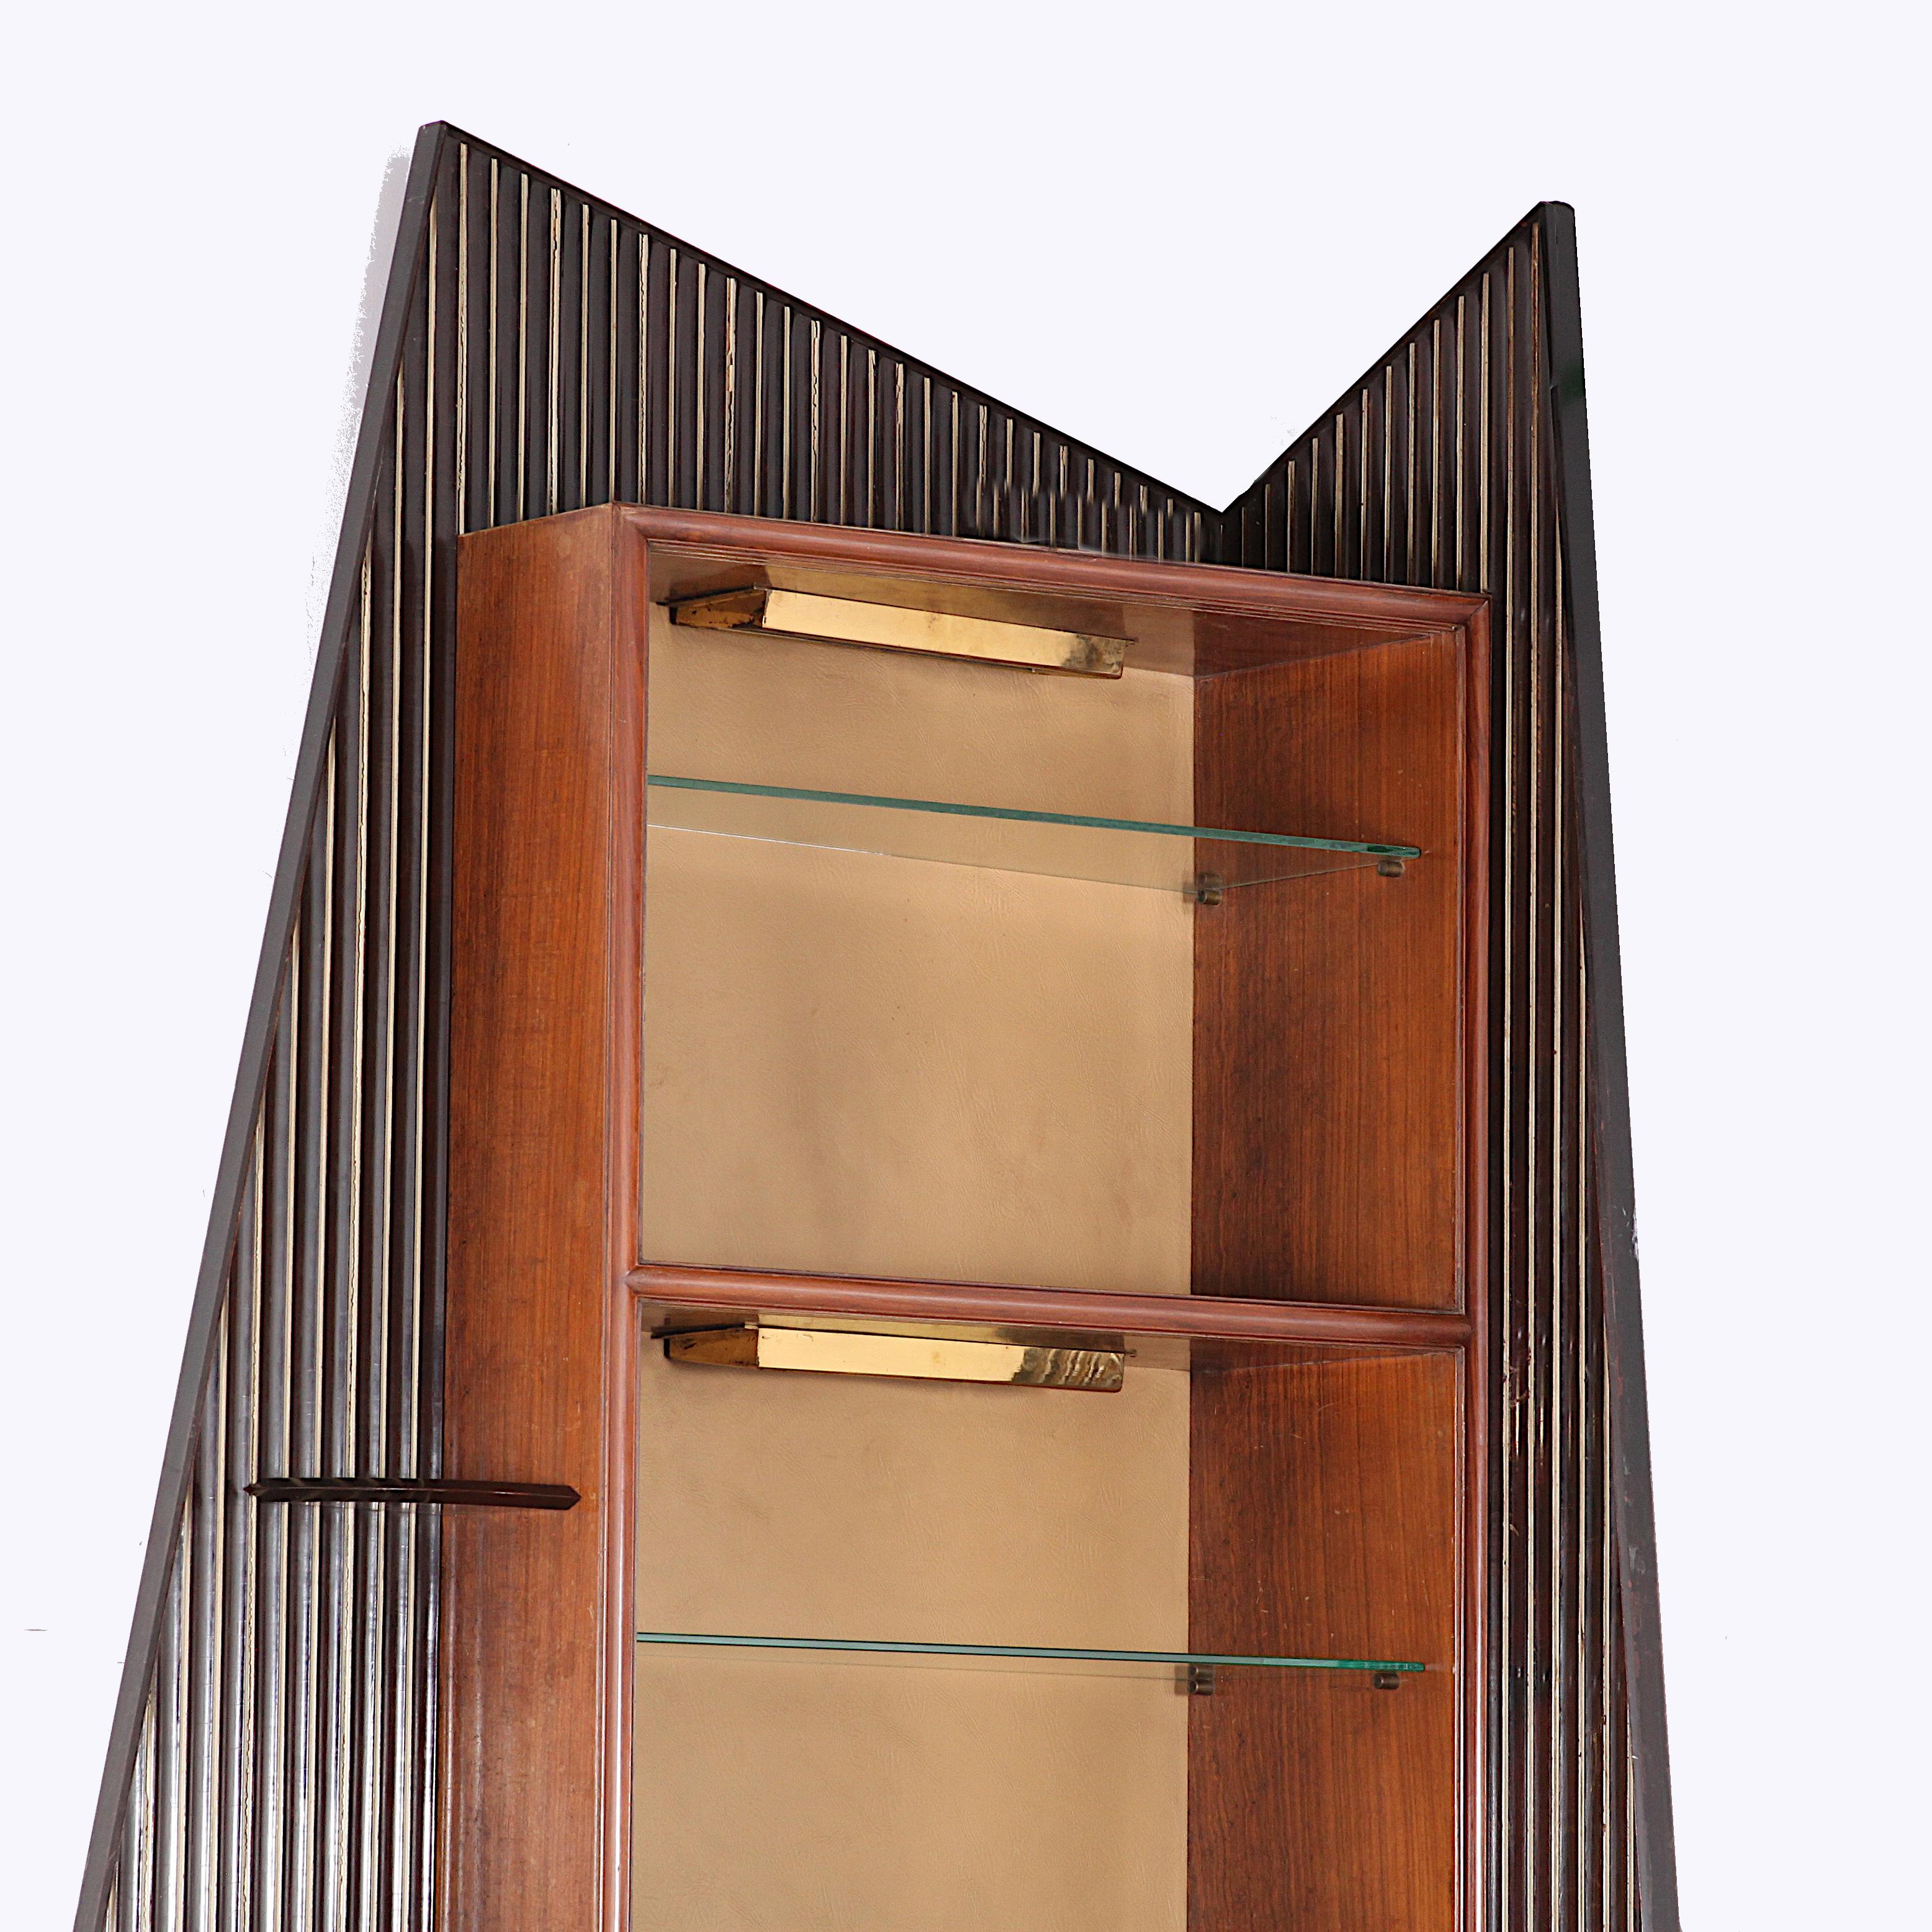 Italian mid-20th century curved bar & matching wall-mounted corner shelf in glass and exotic wood attributed to Osvaldo Borsani. Sleek fluted surfaces and bold assymetrical shape to the corner shelf. Backing of 100% leather on shelving unit which